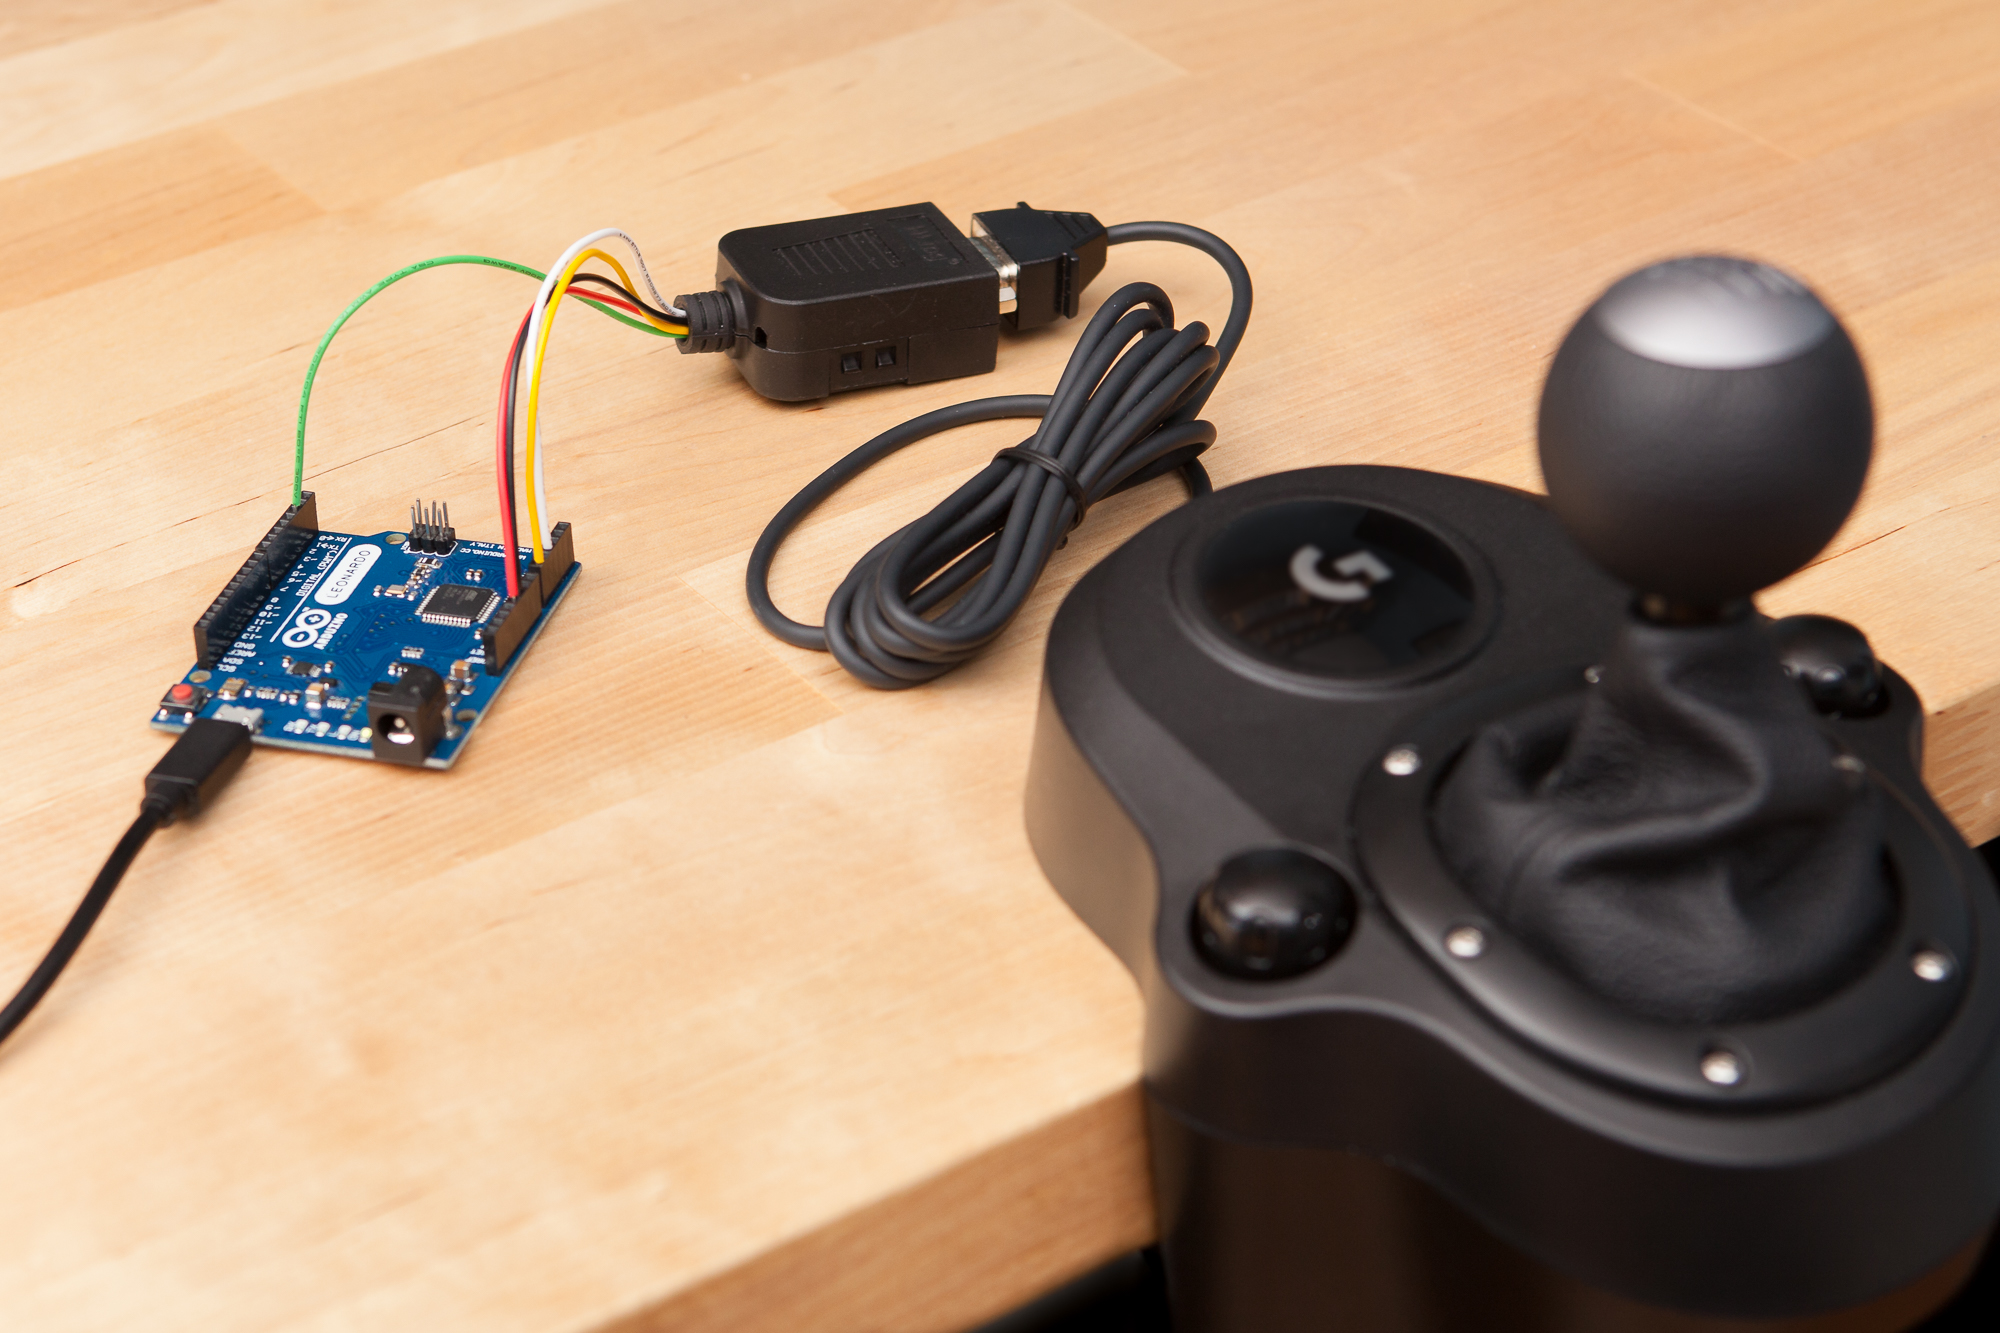 by Let Bærbar How to Build a DIY Logitech Shifter USB Adapter - Parts Not Included